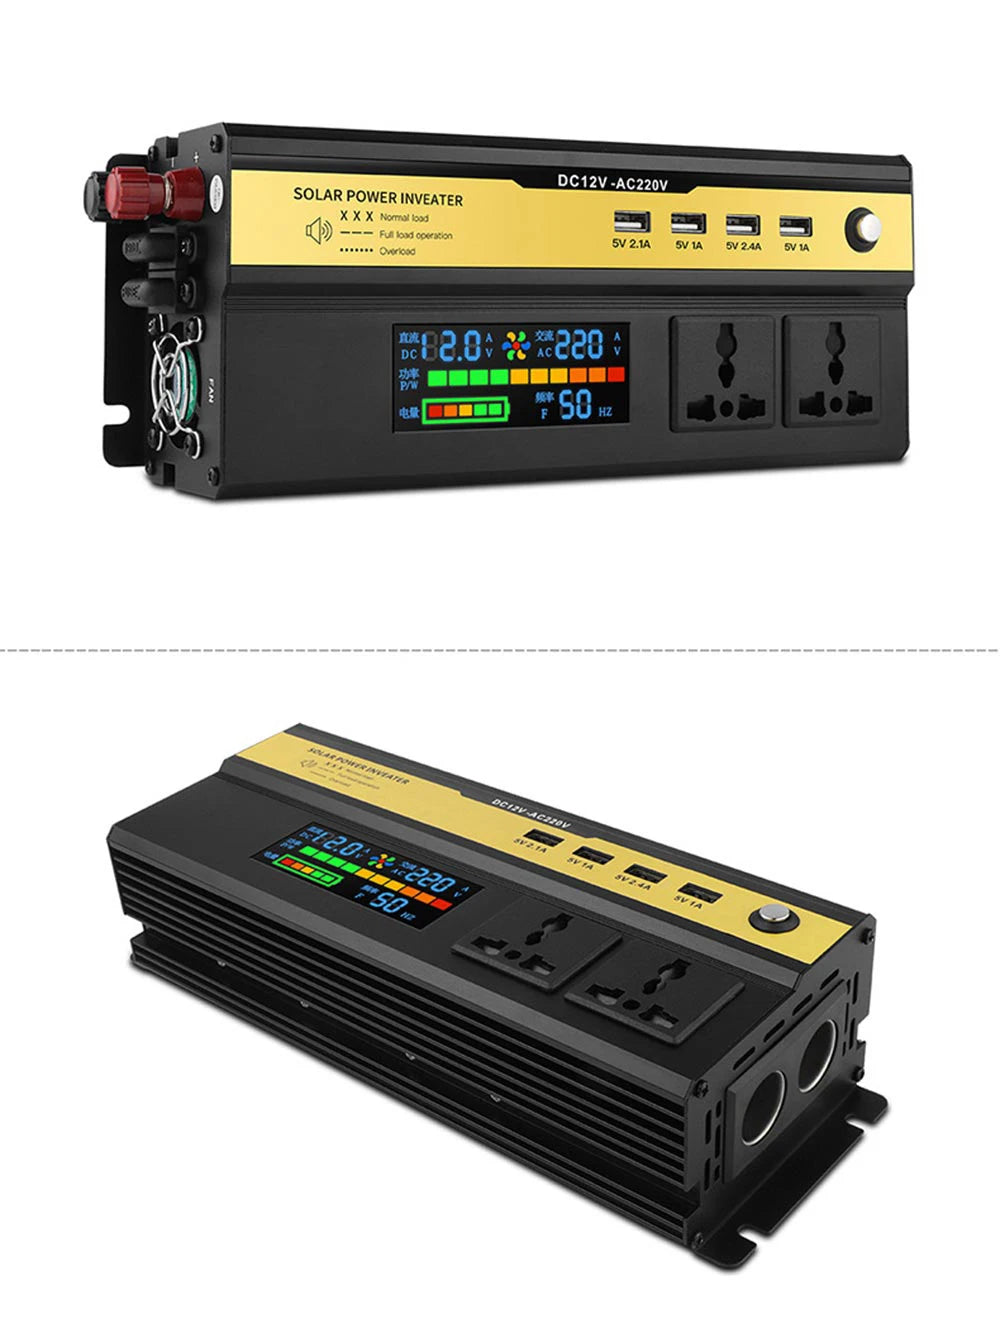 Pure Sine Wave Inverter with USB charger, DC/AC conversion, and advanced features for solar car charging.